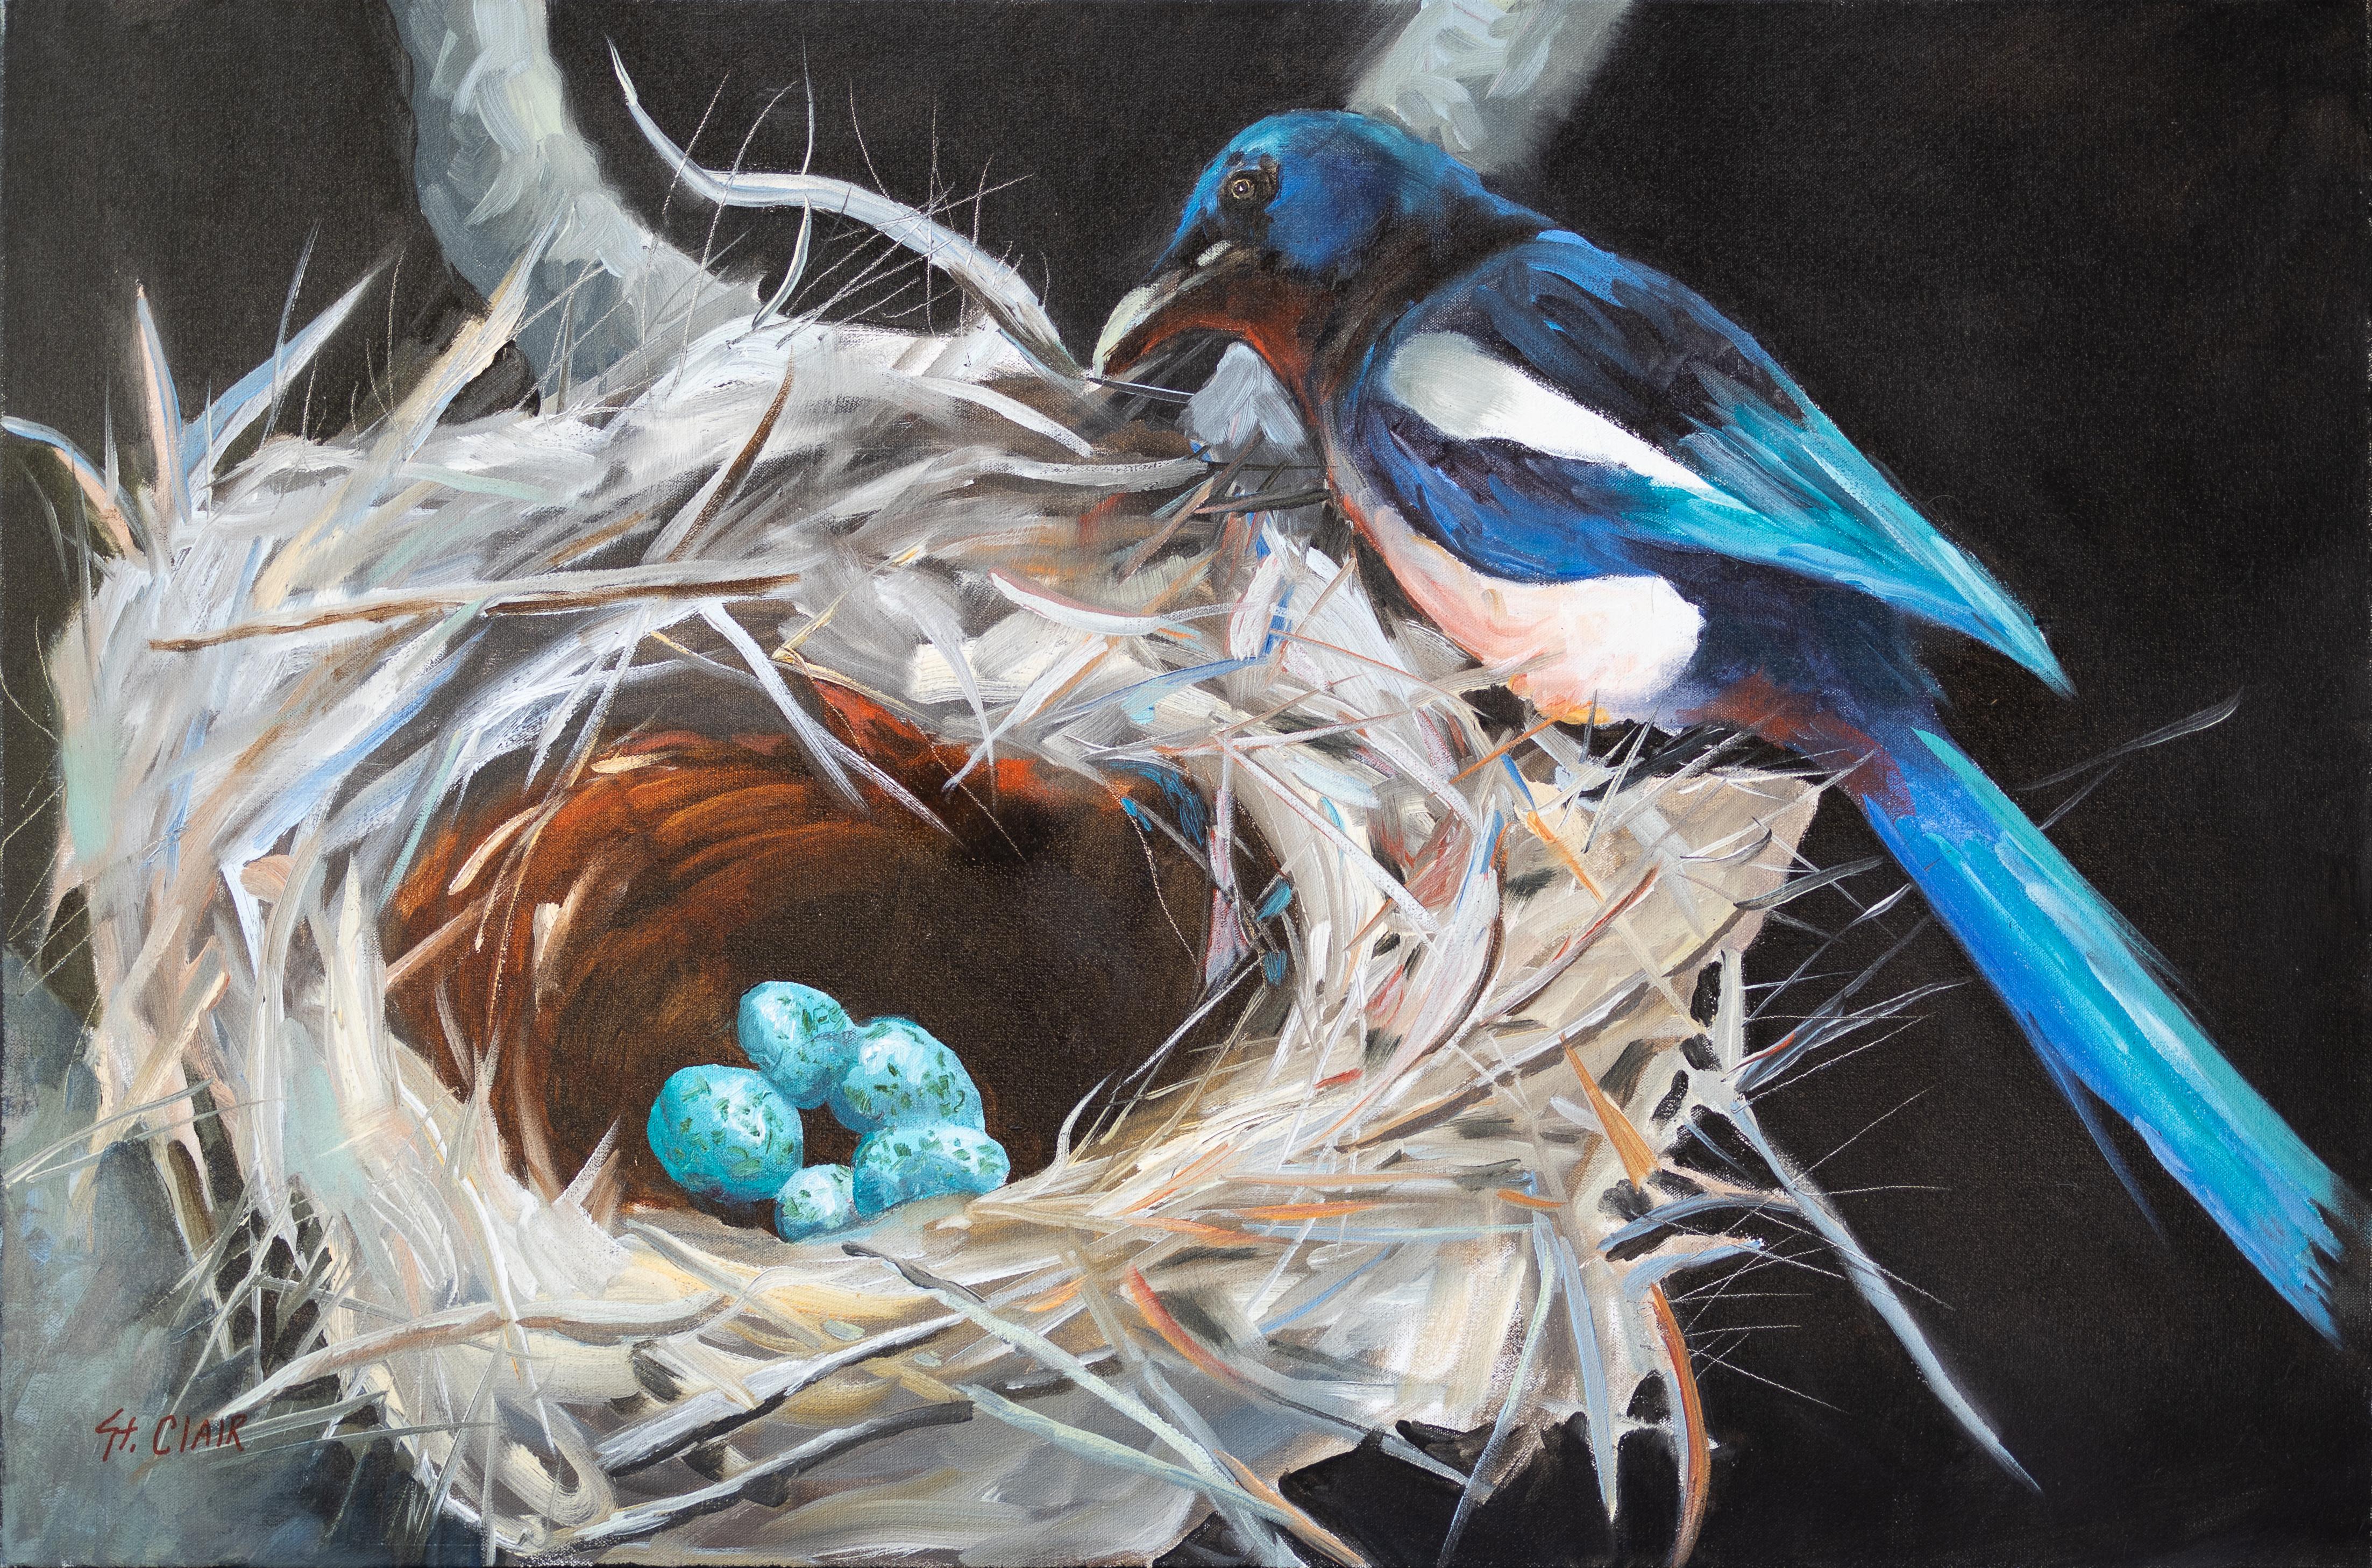 Linda St. Clair Animal Painting - "A Watchful Eye" Blue Magpie Mother Watching Her Eggs